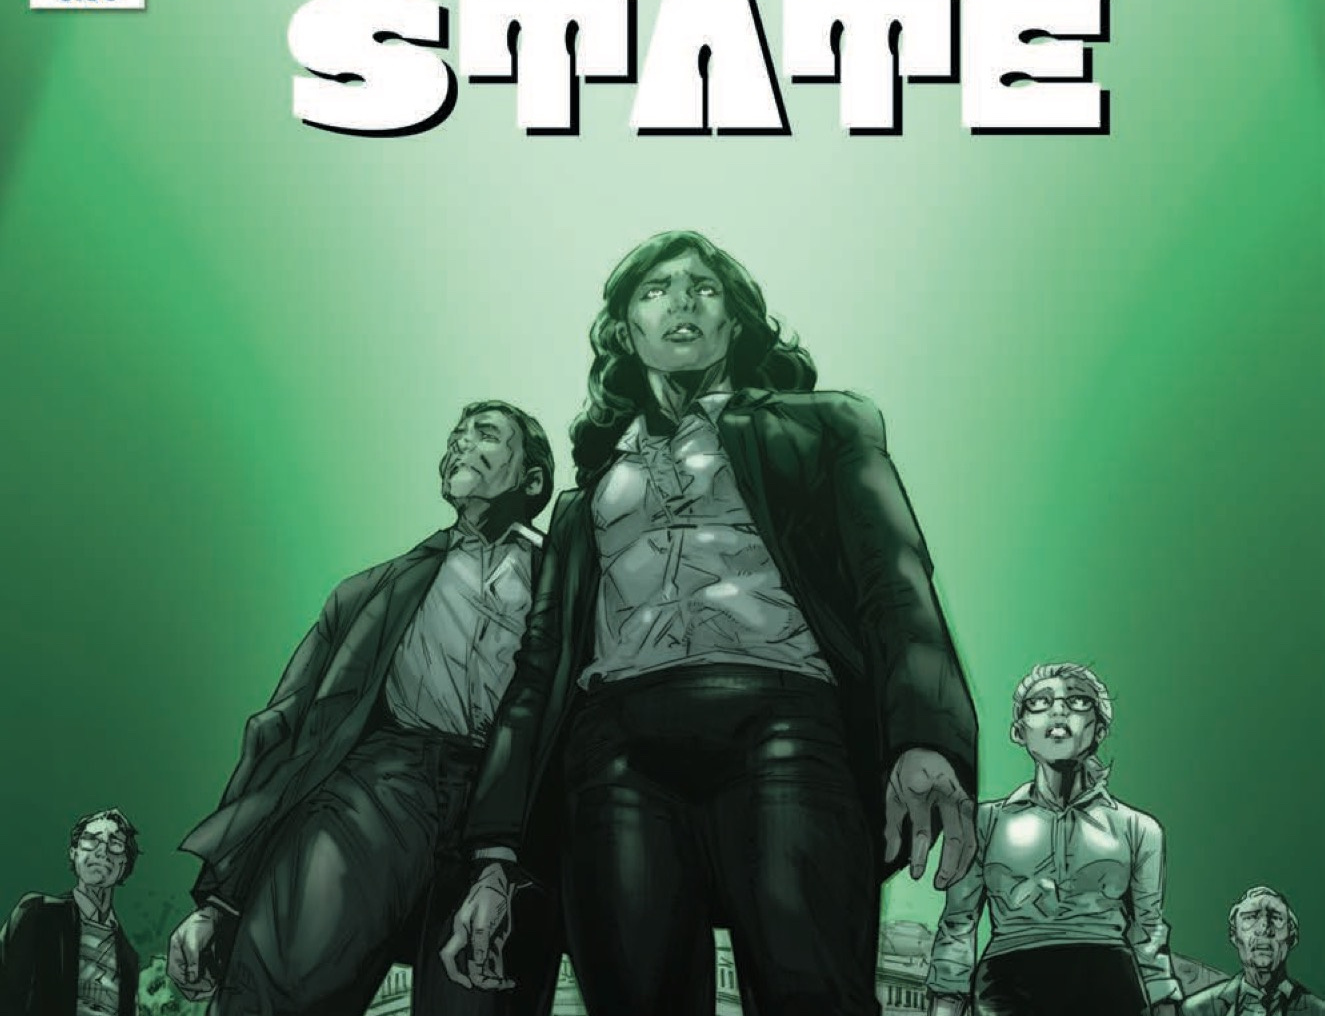 [EXCLUSIVE] IDW Preview: Saucer State #2